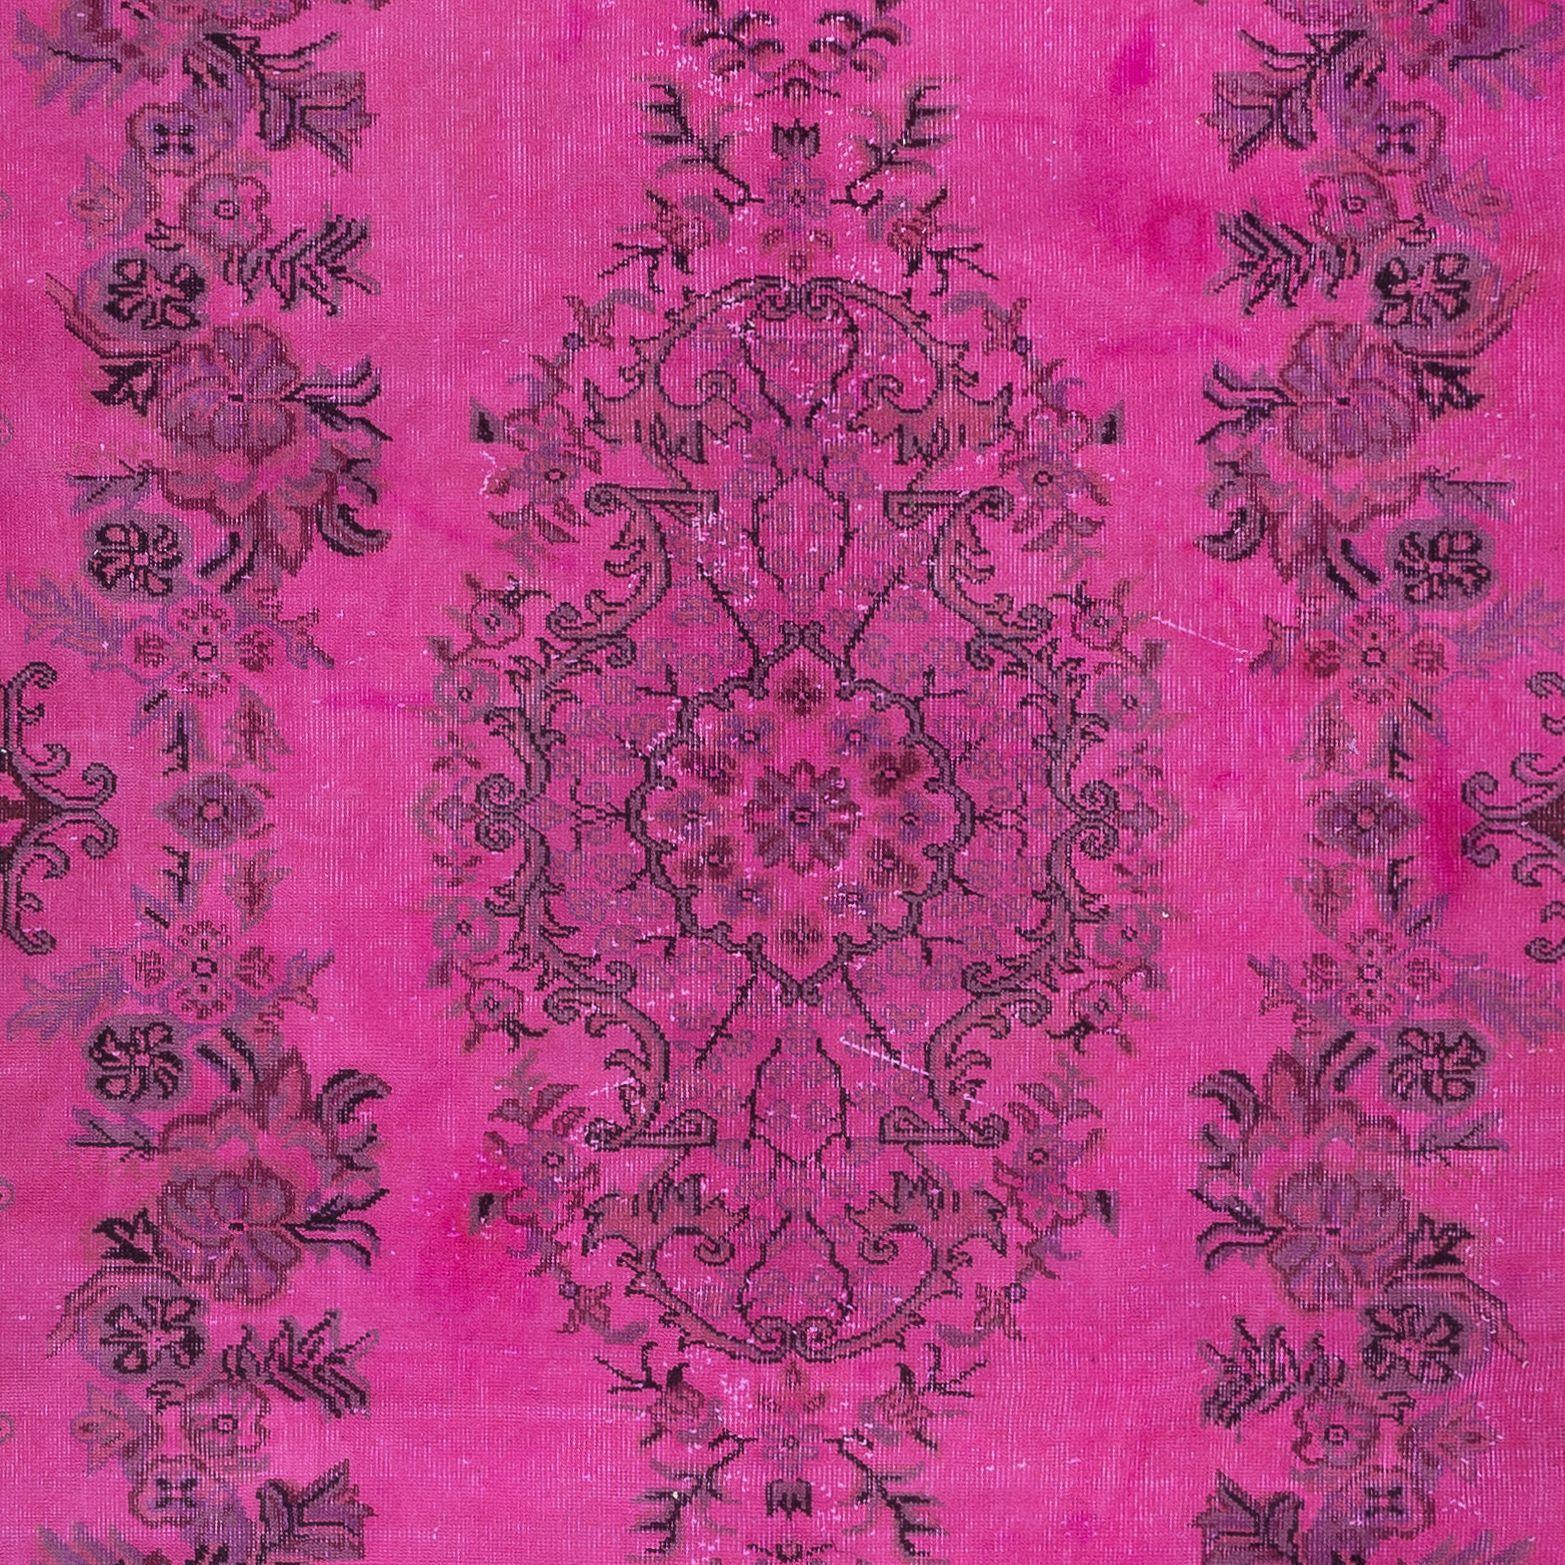 6.4x9.6 Ft Contemporary Pink Area Rug, Handmade Turkish Carpet, Floor Covering In Good Condition For Sale In Philadelphia, PA